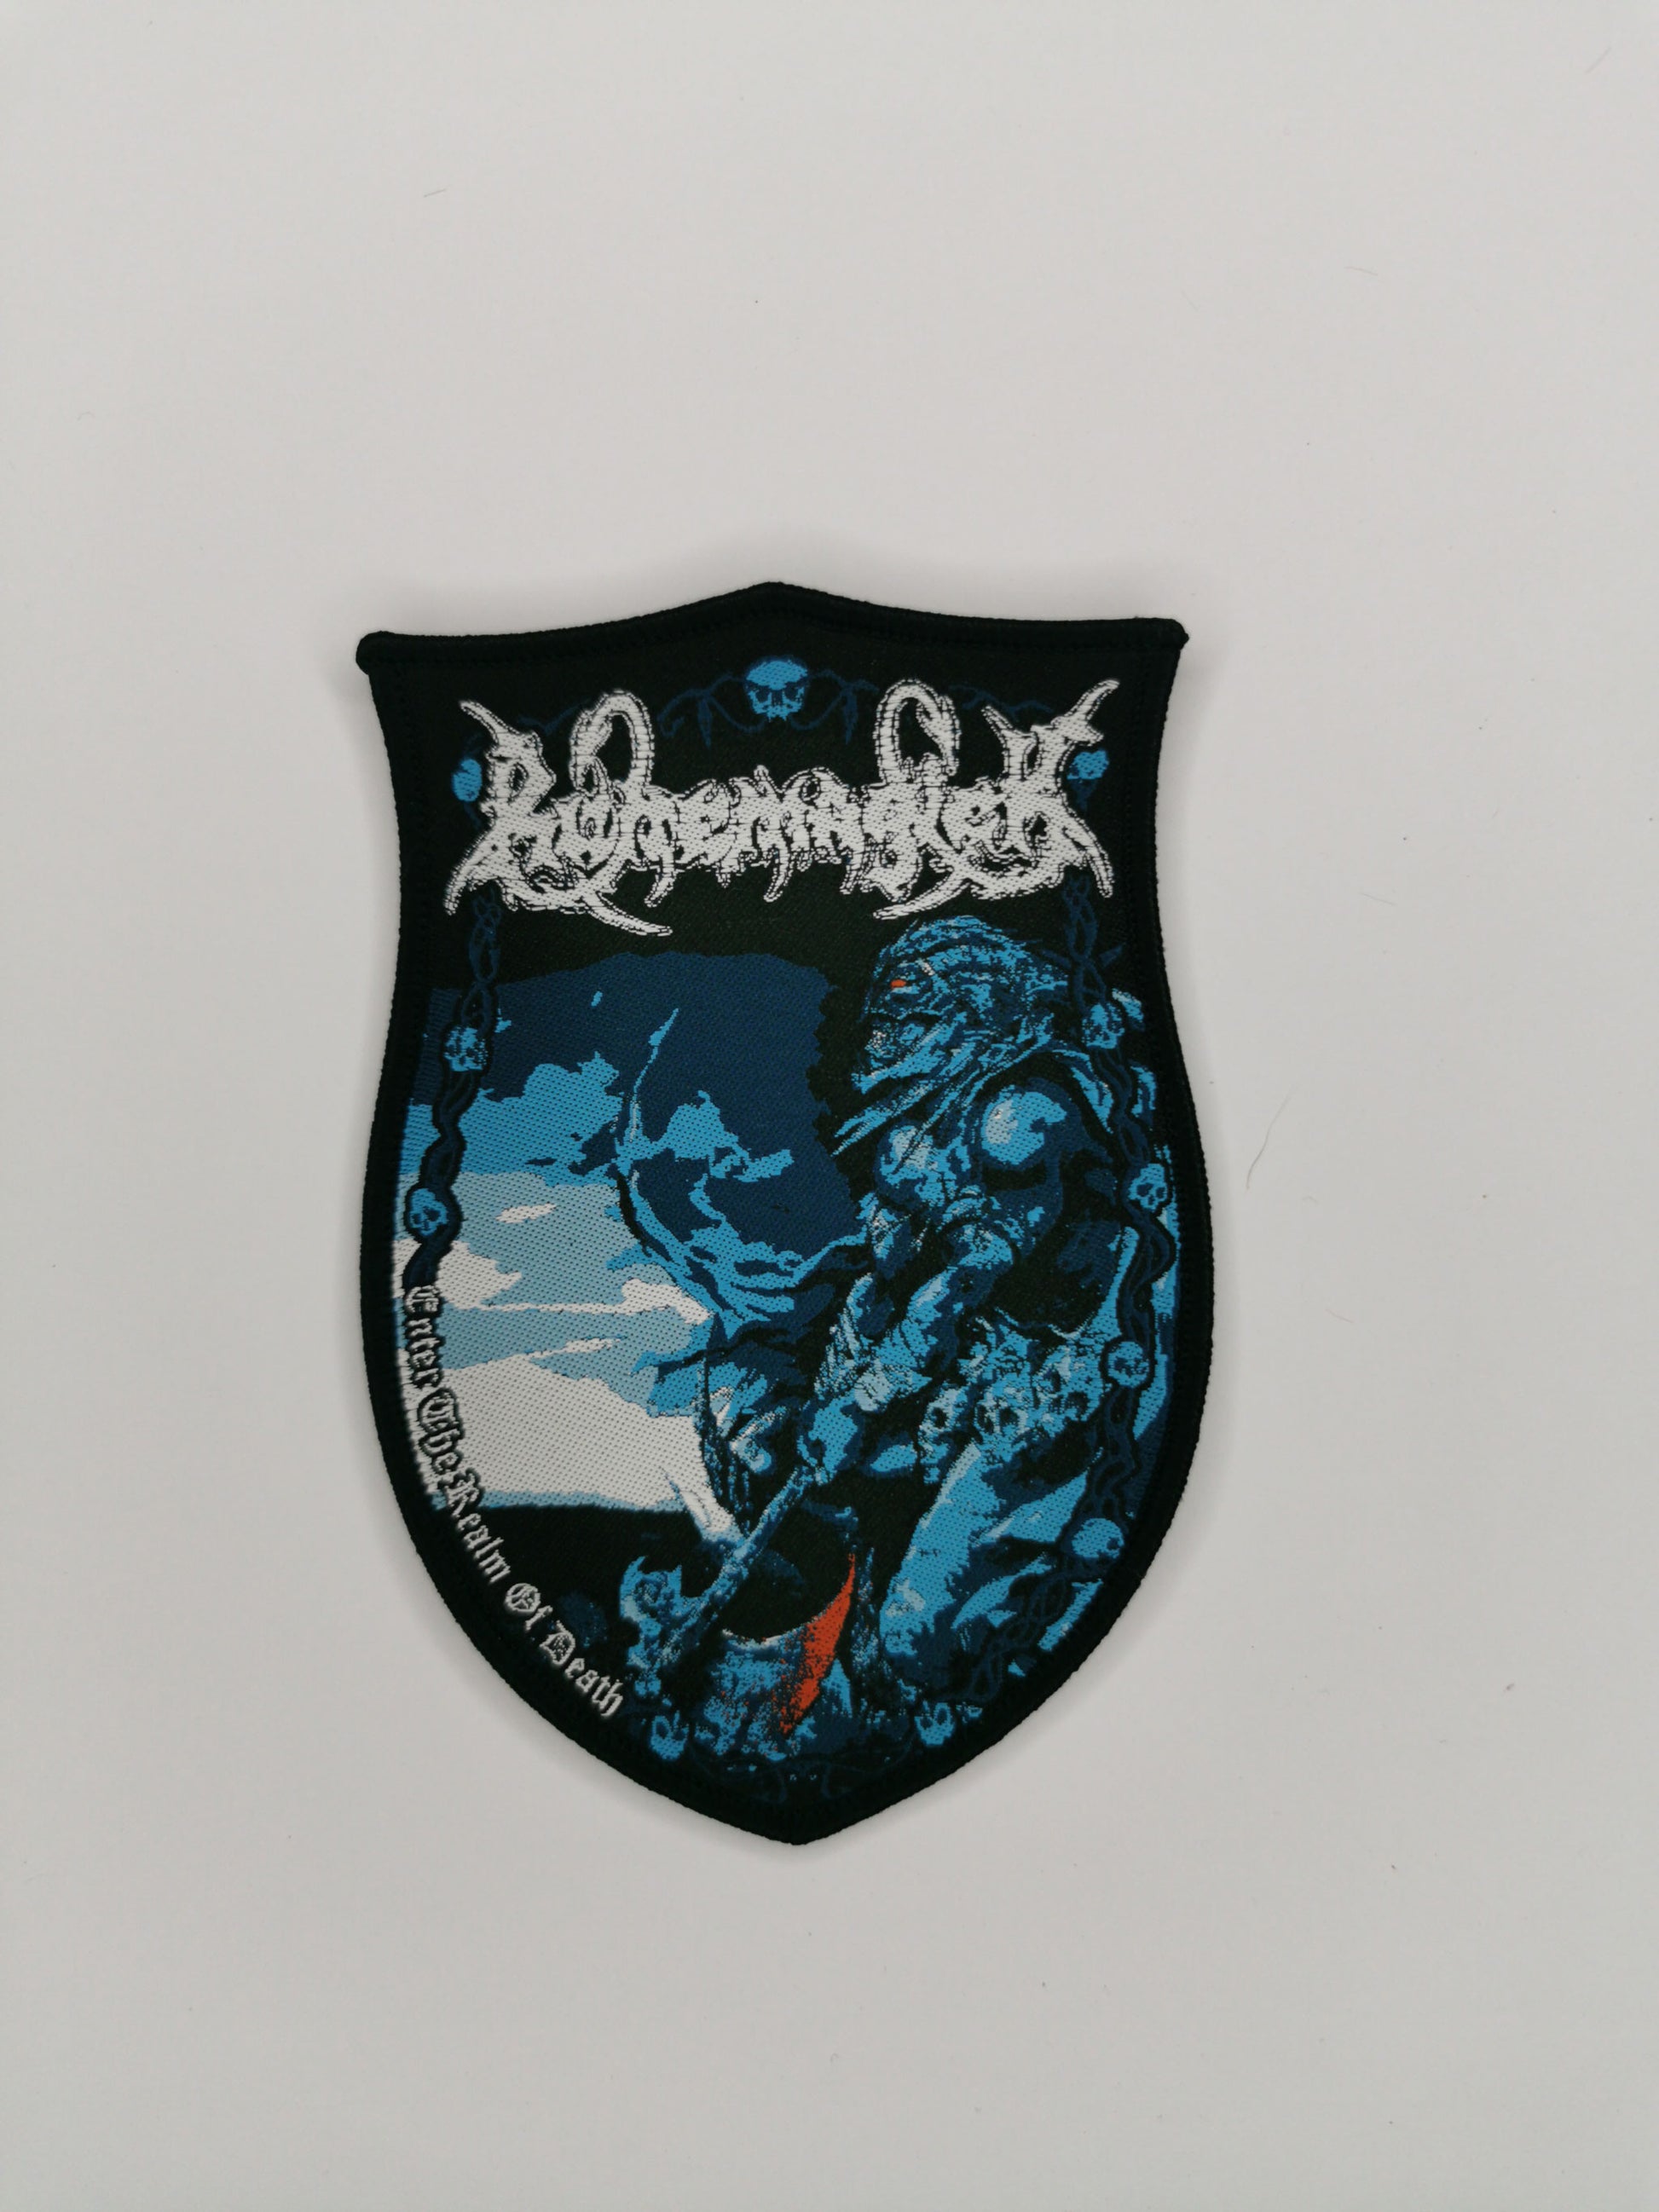 Temporal Dimensions Patches Runemagick Enter the Realm of Death Metal Black Border Woven Patch